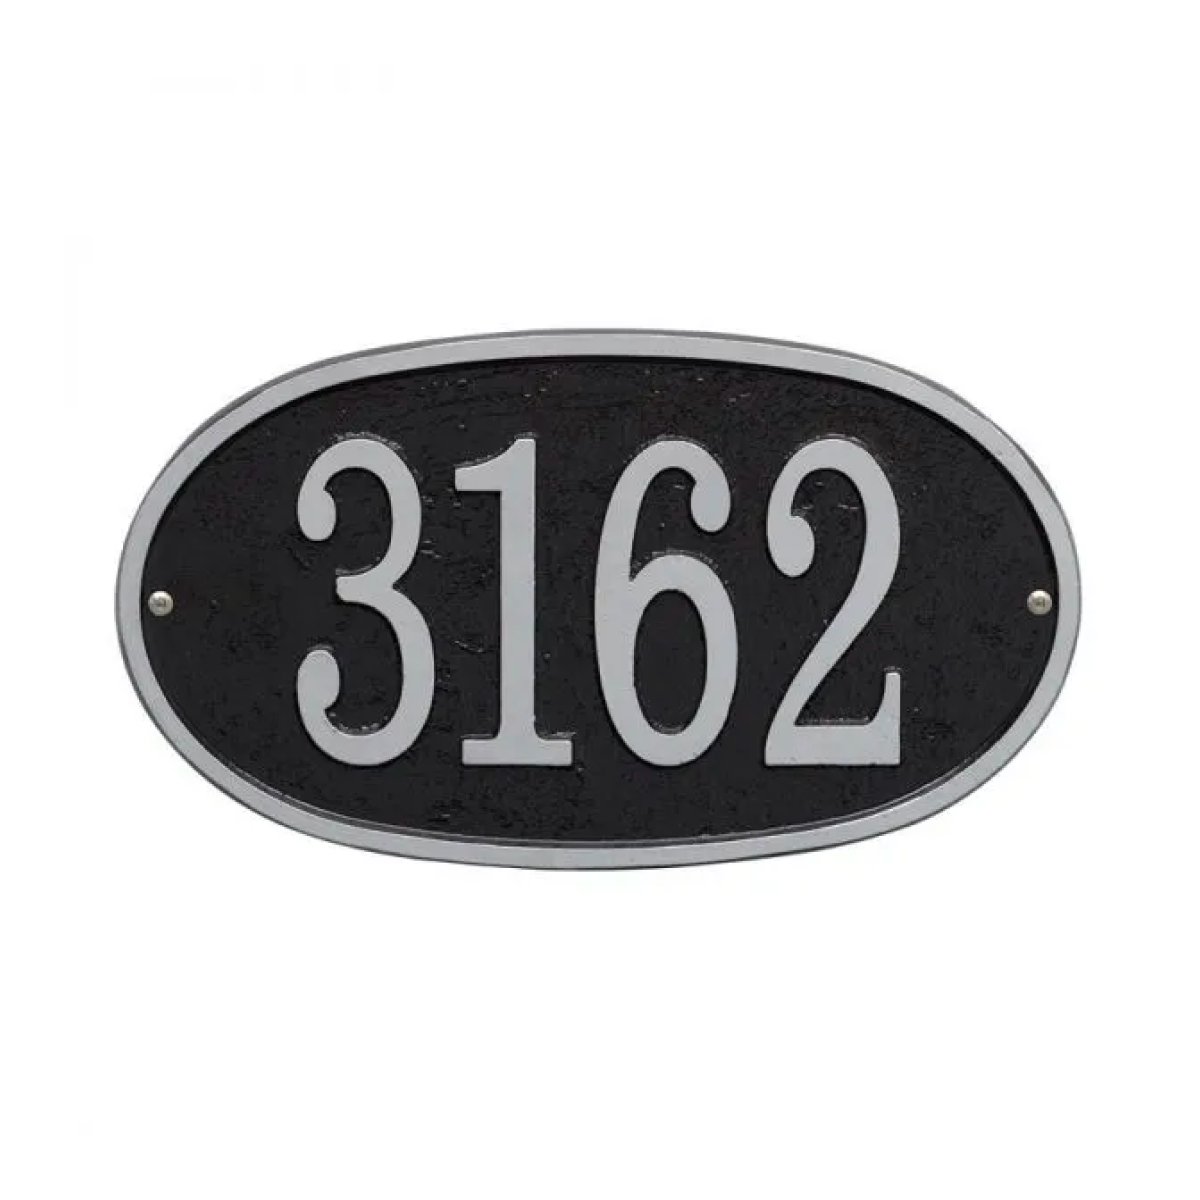 Majestic Solid Brass Large Oval Address Plaques Product Image